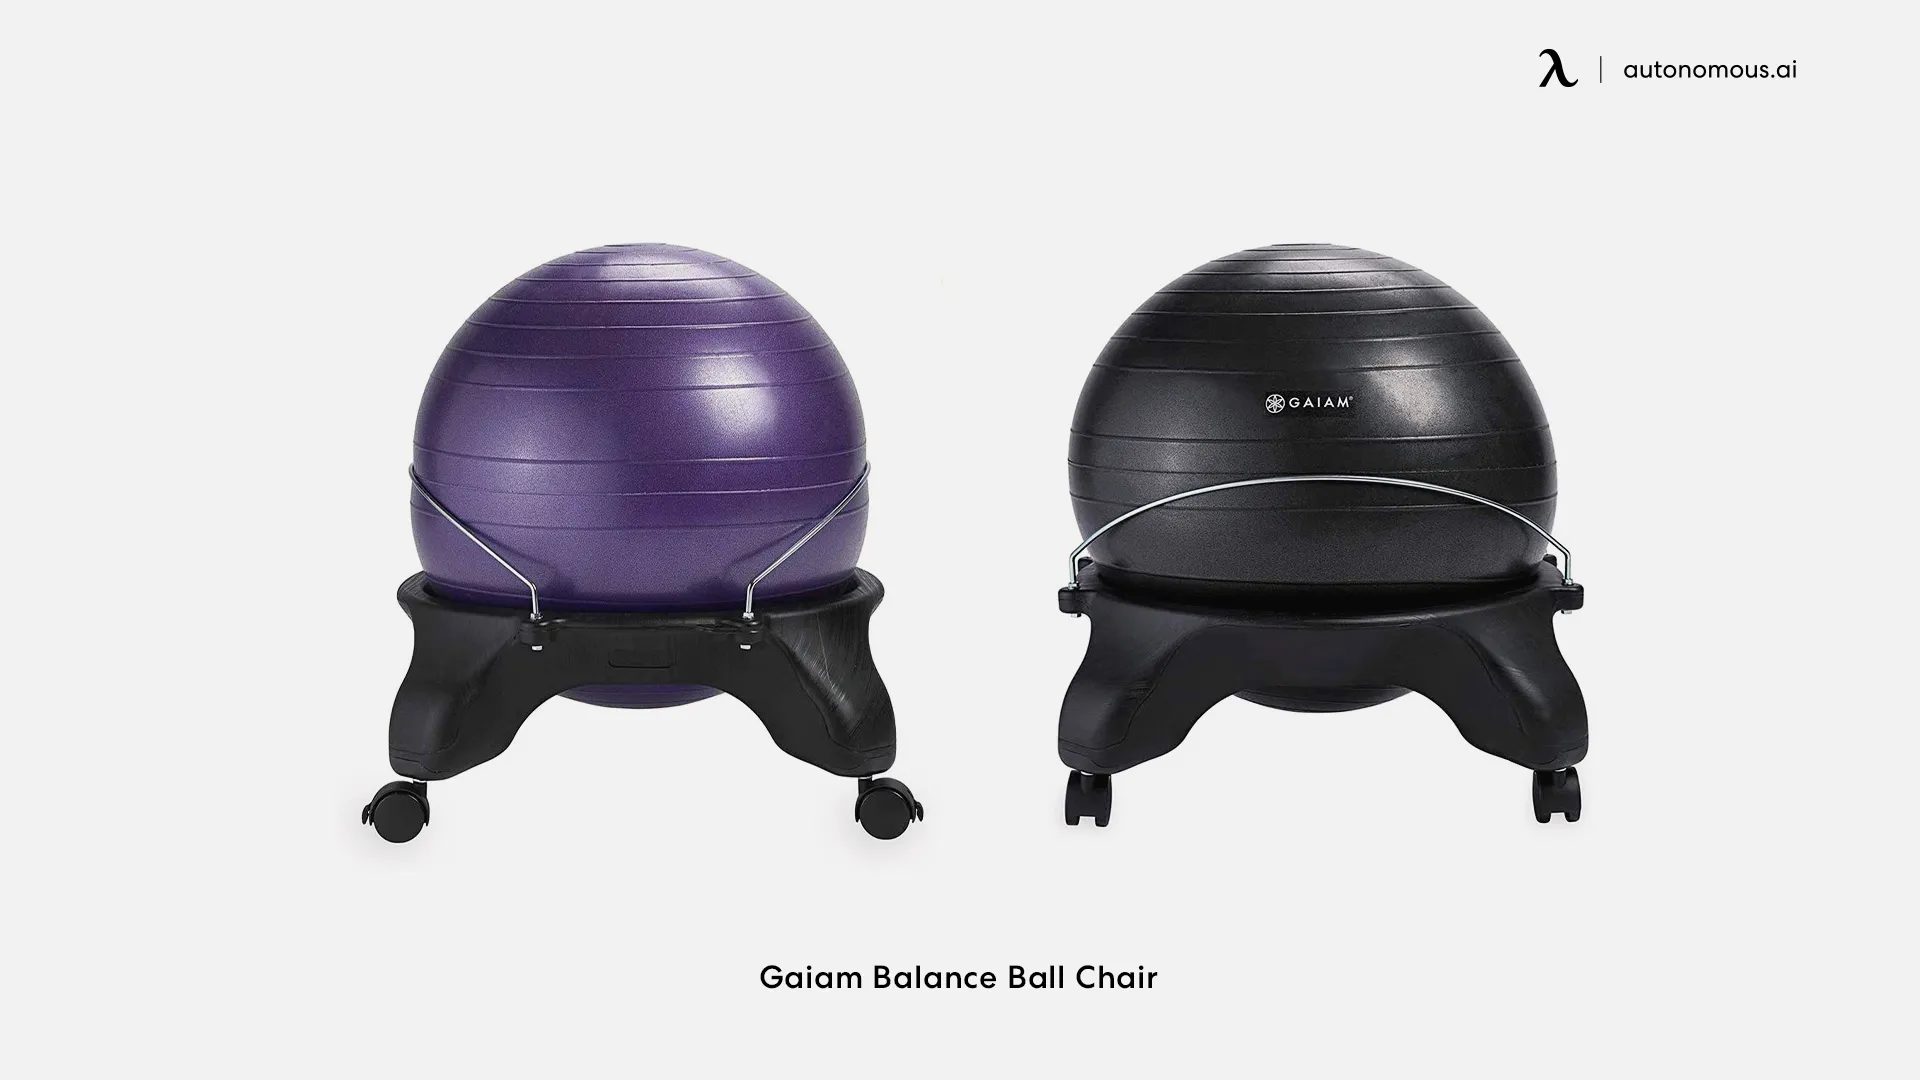 Chair with a balancing ball by Gaiam